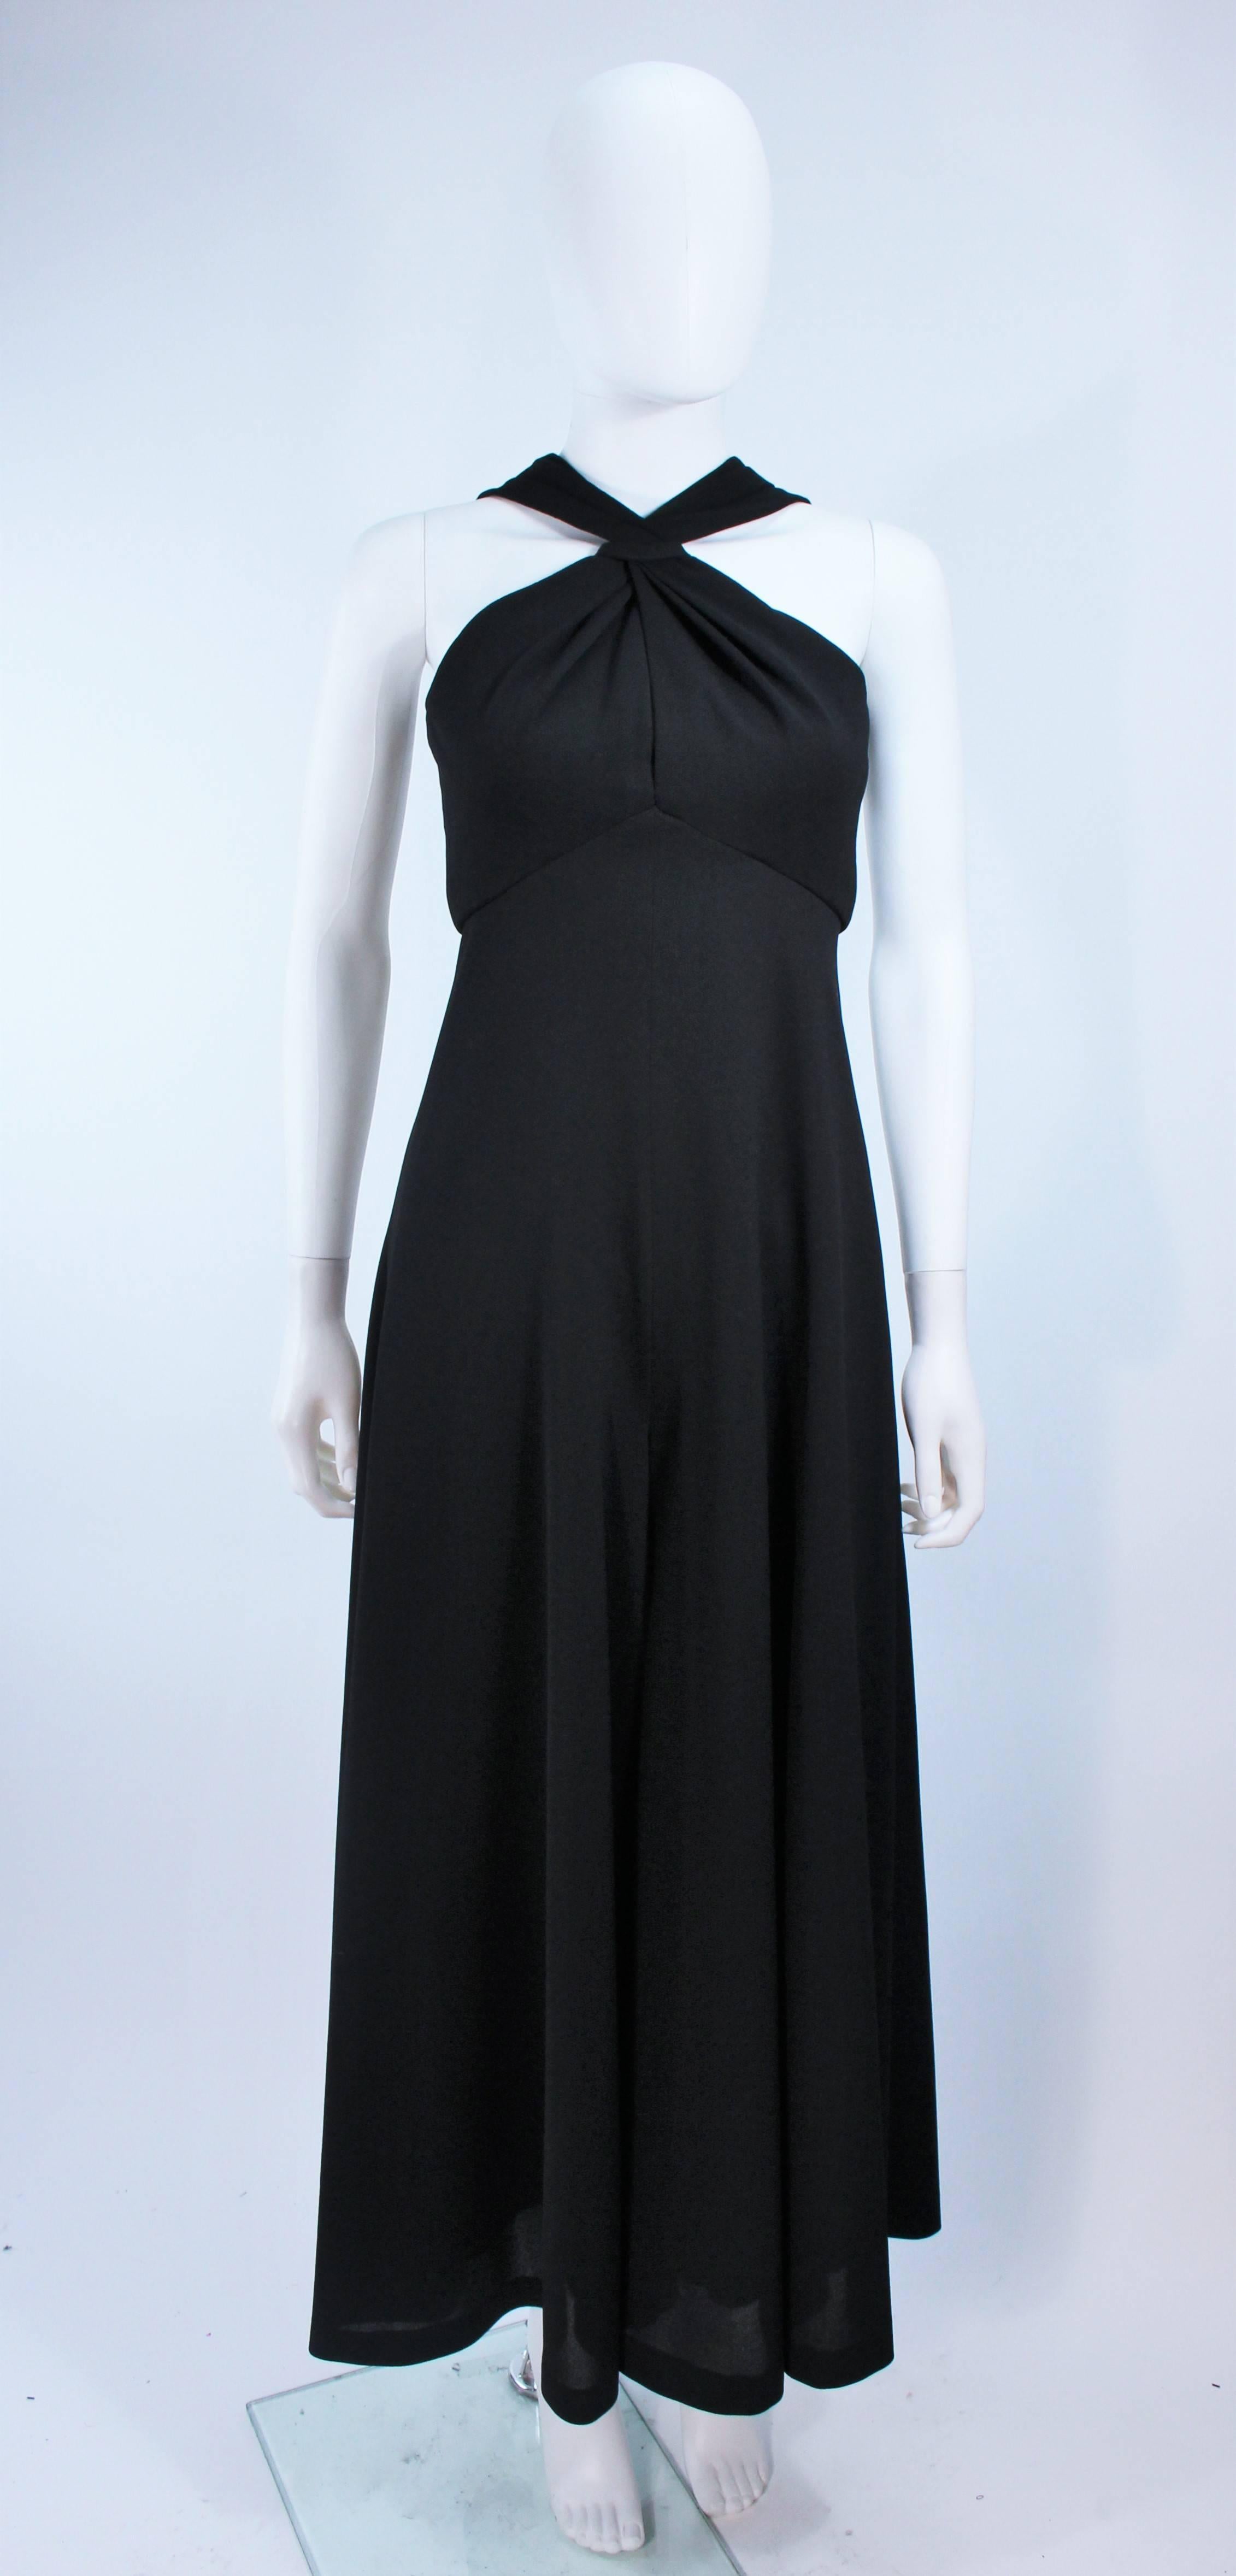  This jumpsuit is composed of a black crepe. Features a criss cross front detail and center back zipper closure. Excellent vintage condition.

  **Please cross-reference measurements for personal accuracy. Size in description box is an